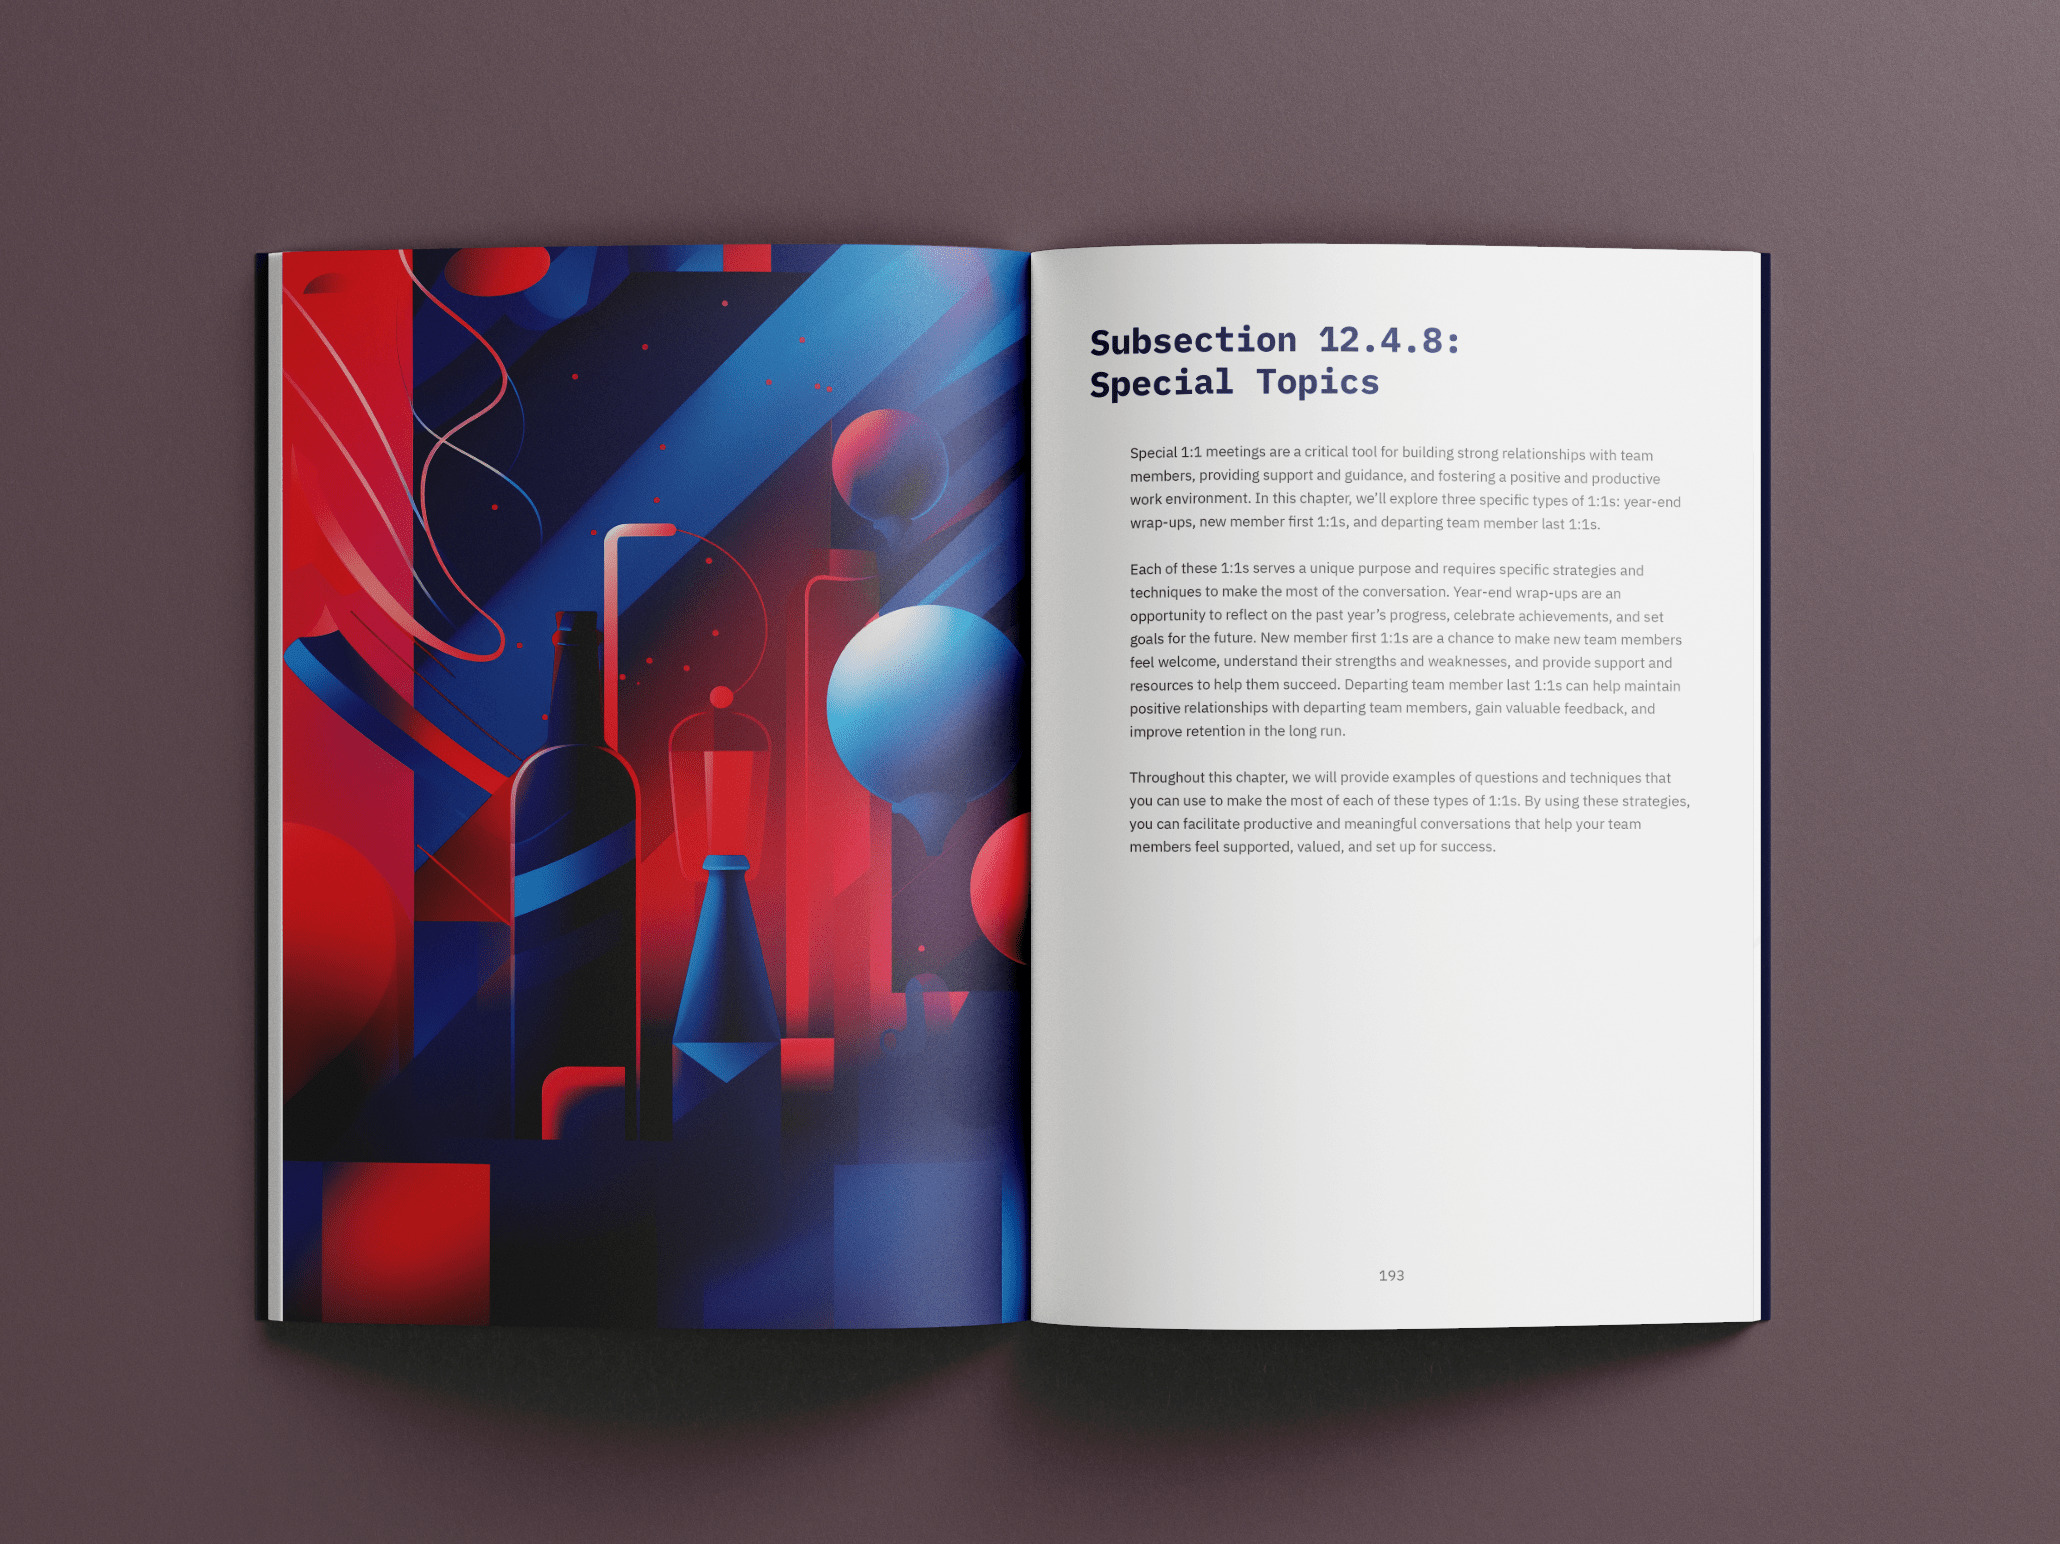 Artistic book spread with a colorful abstract illustration for a section on 'Special Topics' in 1:1 meetings, featuring strategies for strong team relationships.